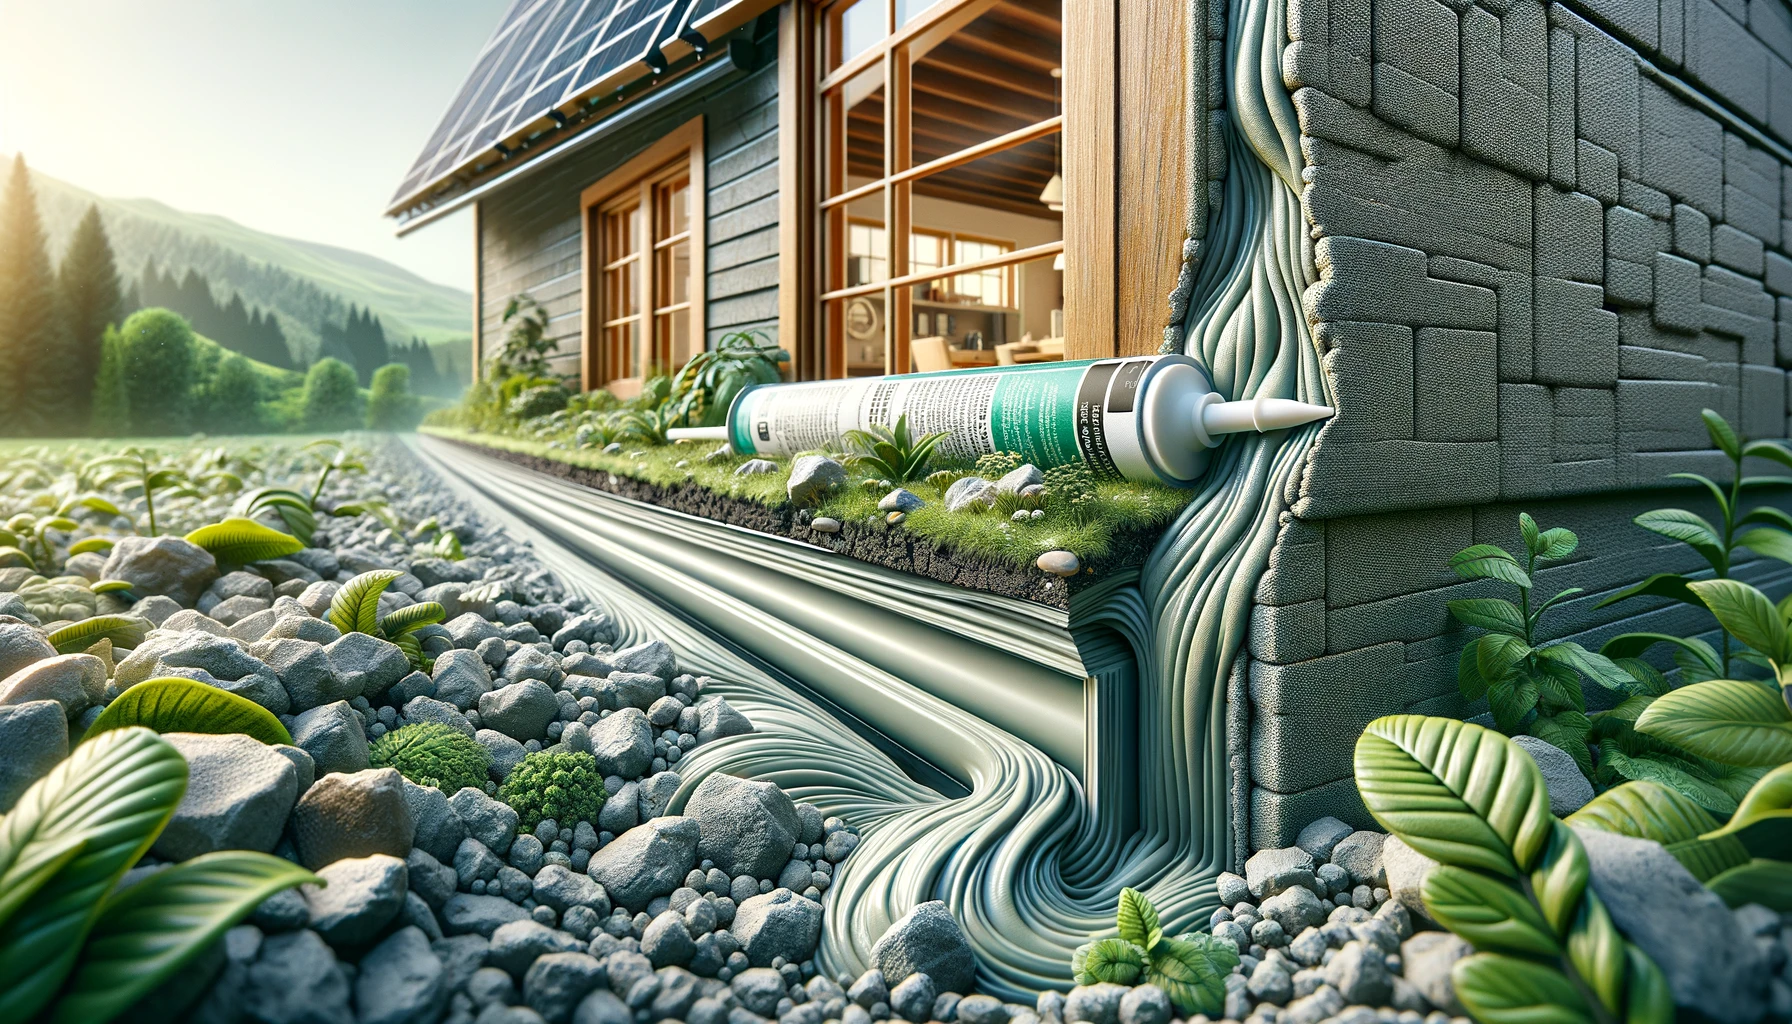 A highly detailed and realistic landscape-oriented image focusing intensely on the application and impact of caulking in a sustainable home's